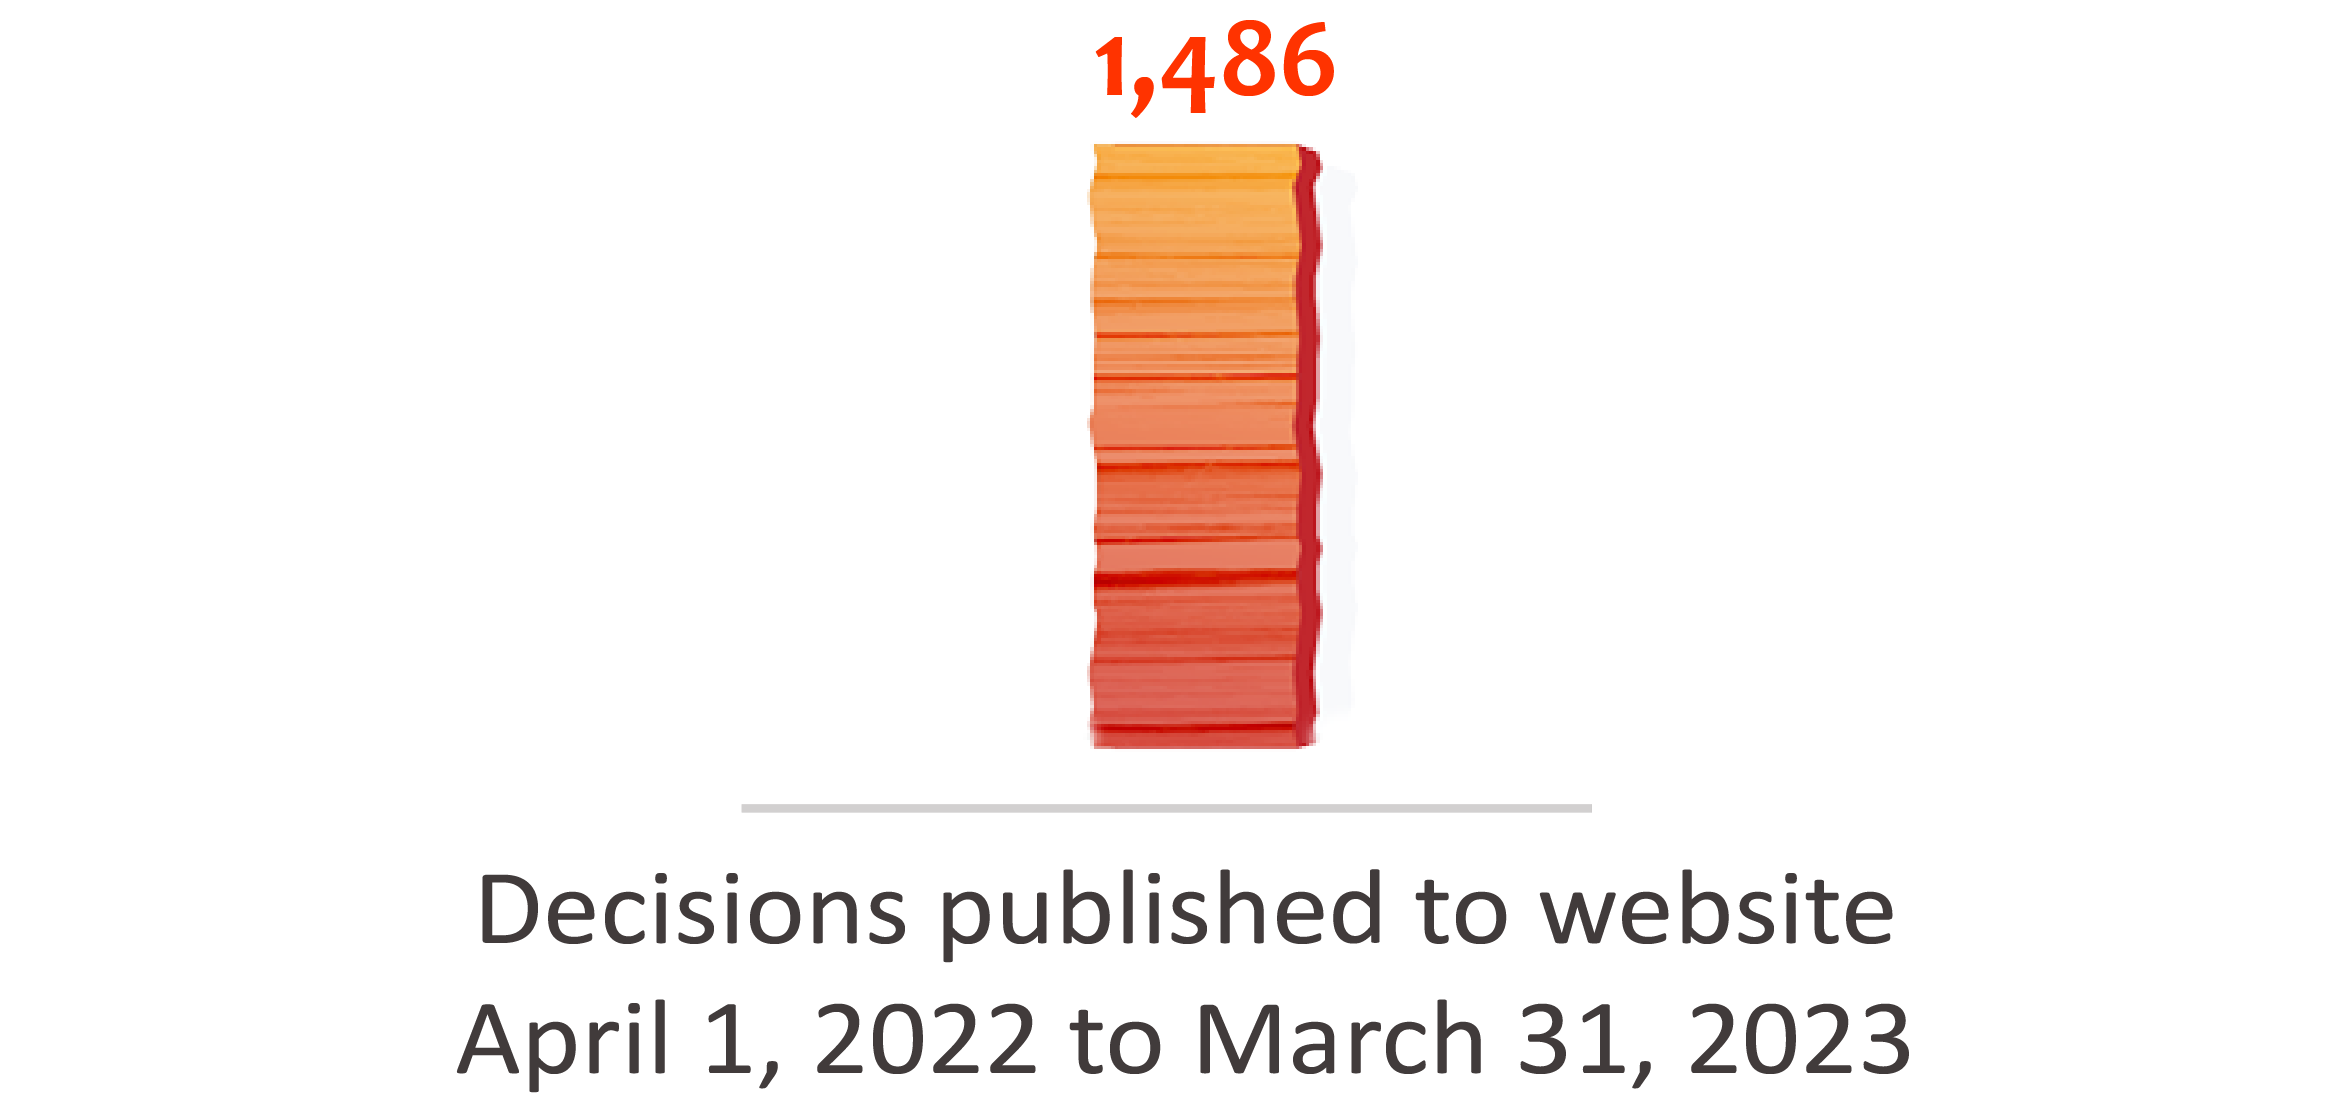 Decisions published to website - April 1, 2022 to March 31, 2023: 1,486